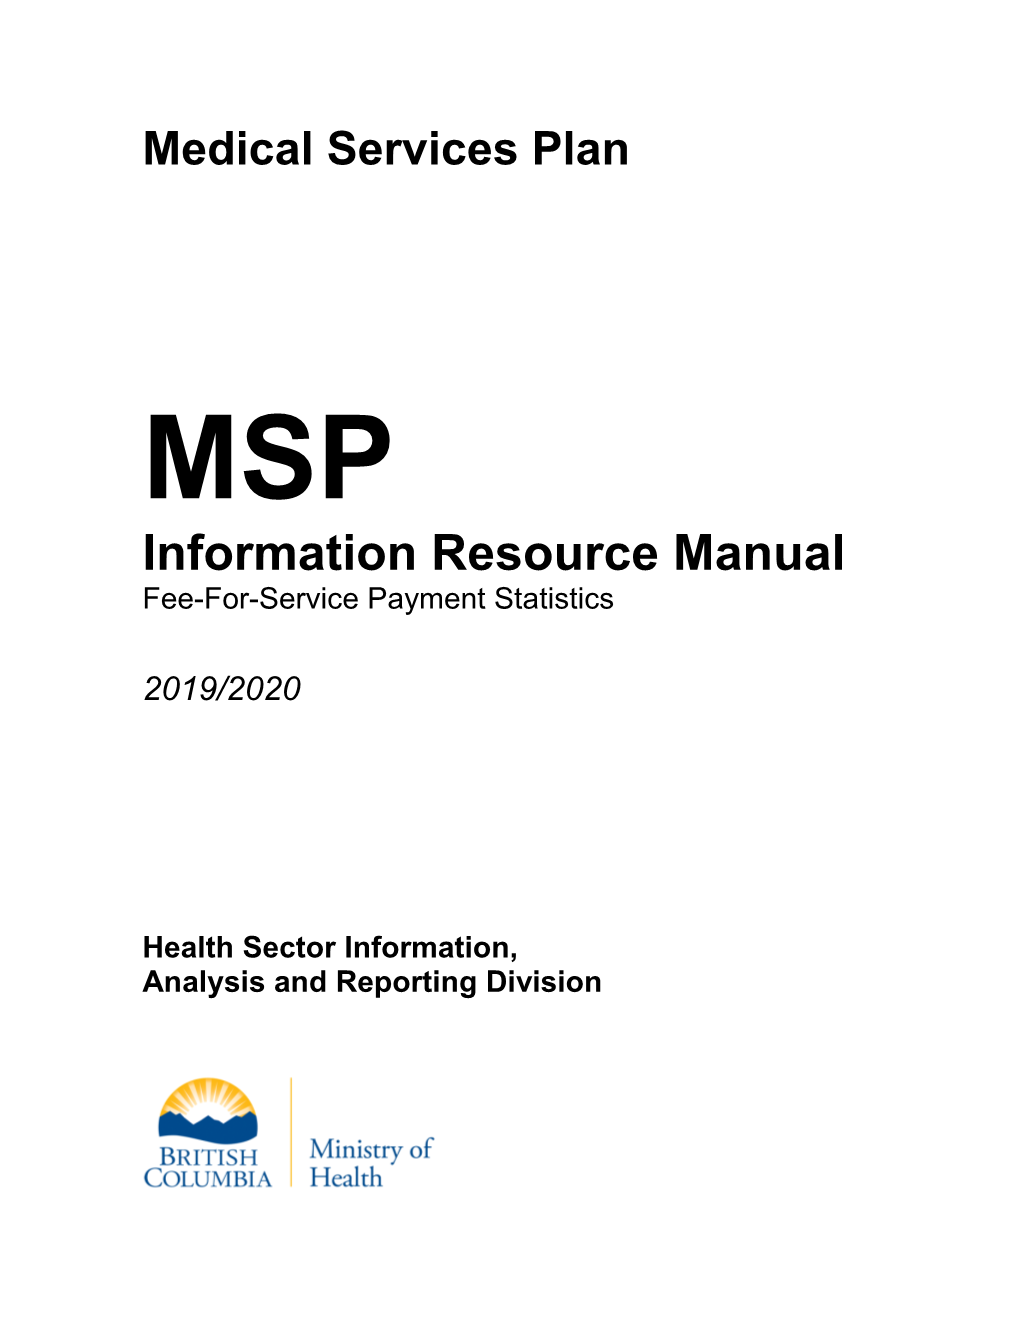 Information Resource Manual Fee-For-Service Payment Statistics